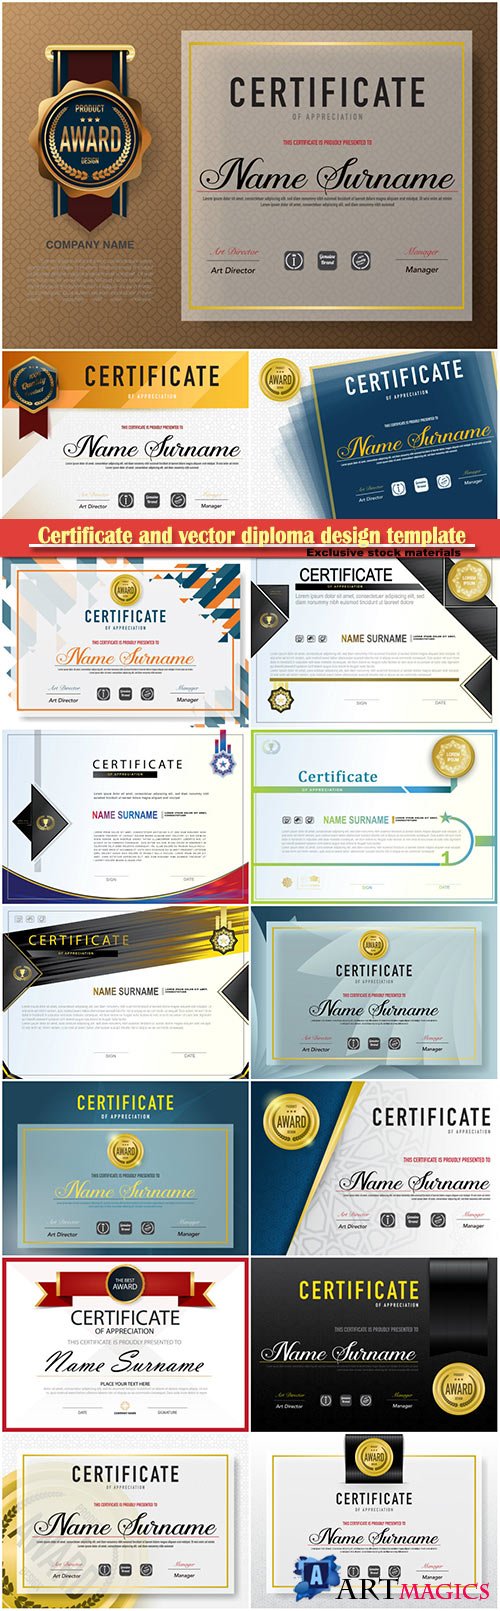 Certificate and vector diploma design template # 42